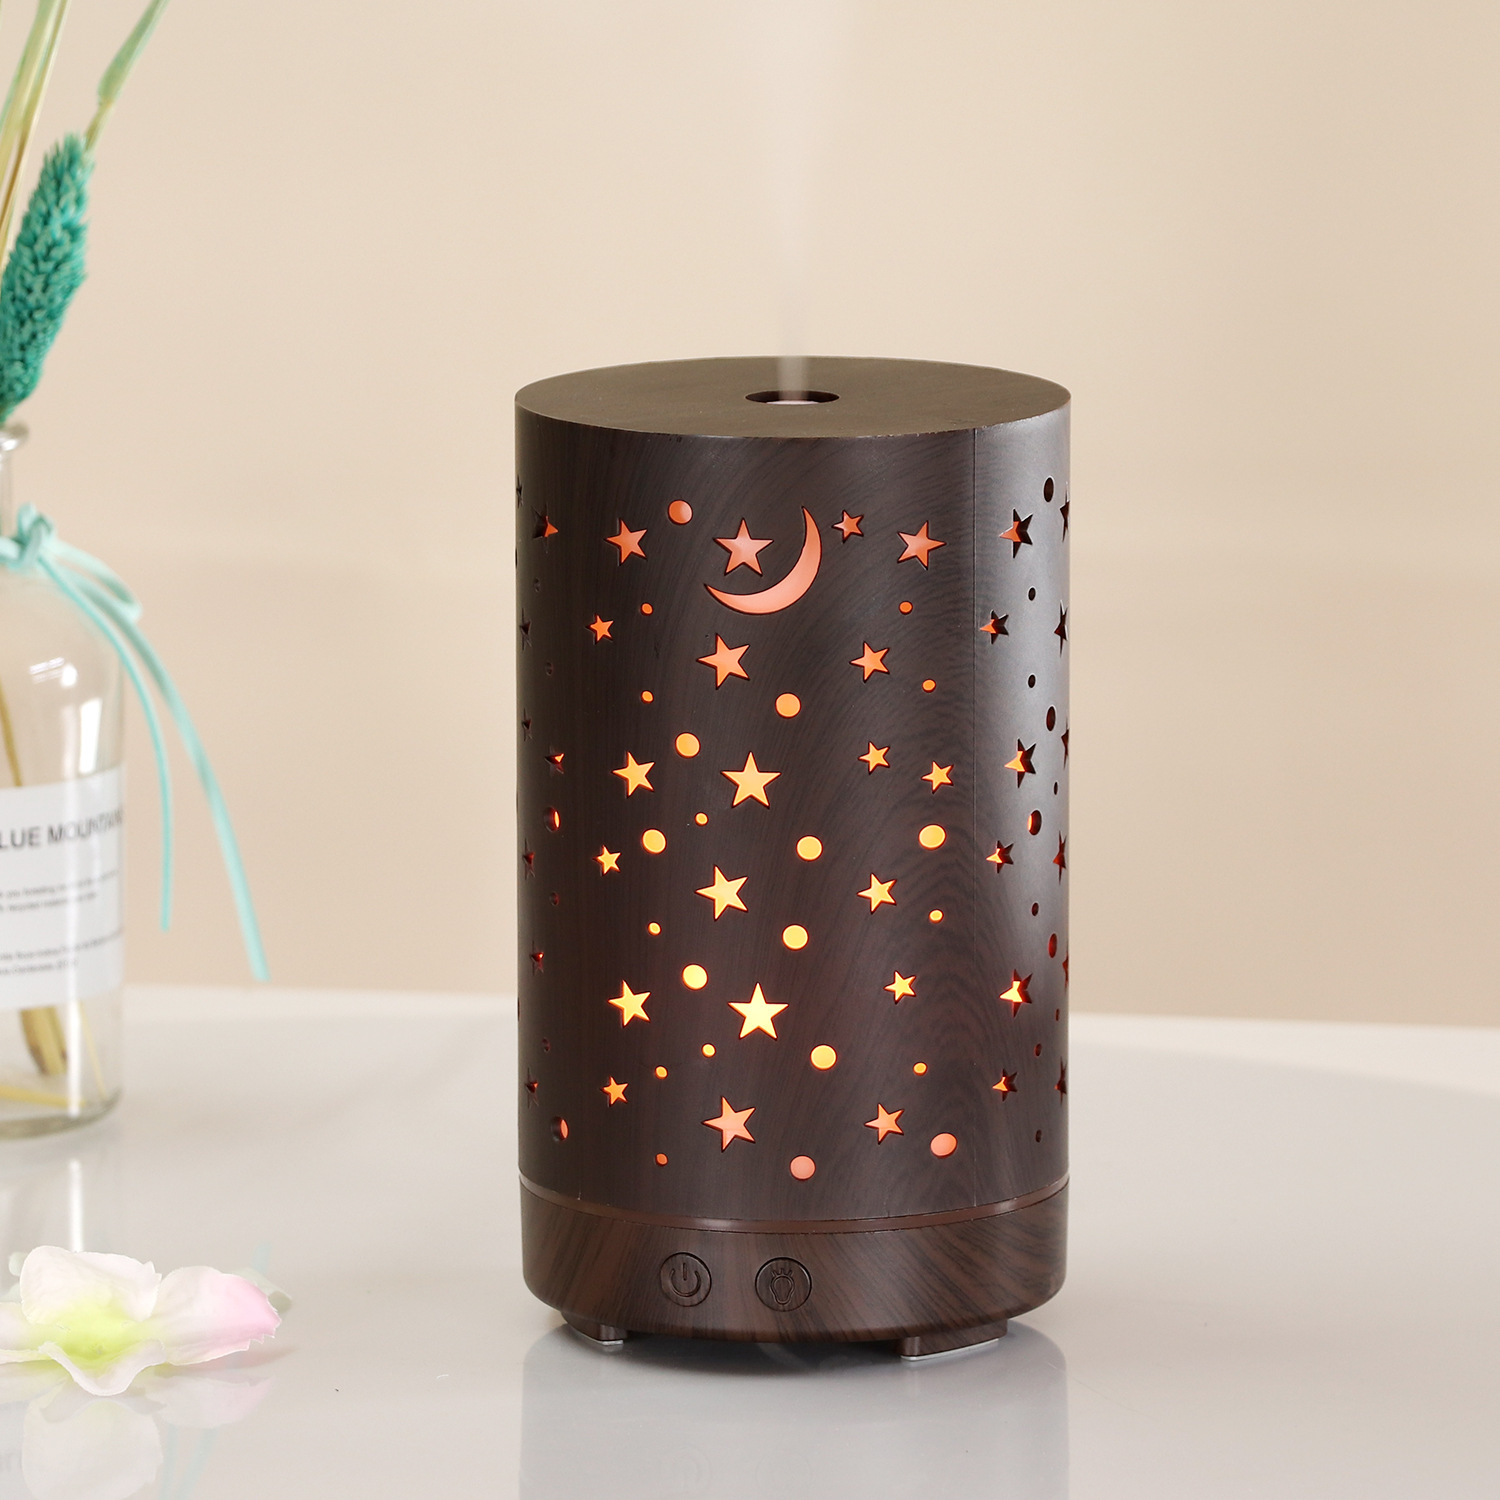 New Creative Starry Sky Humidifier Mini Desktop Office Home Humidifier Portable Colorful Hollow Aroma Diffuser